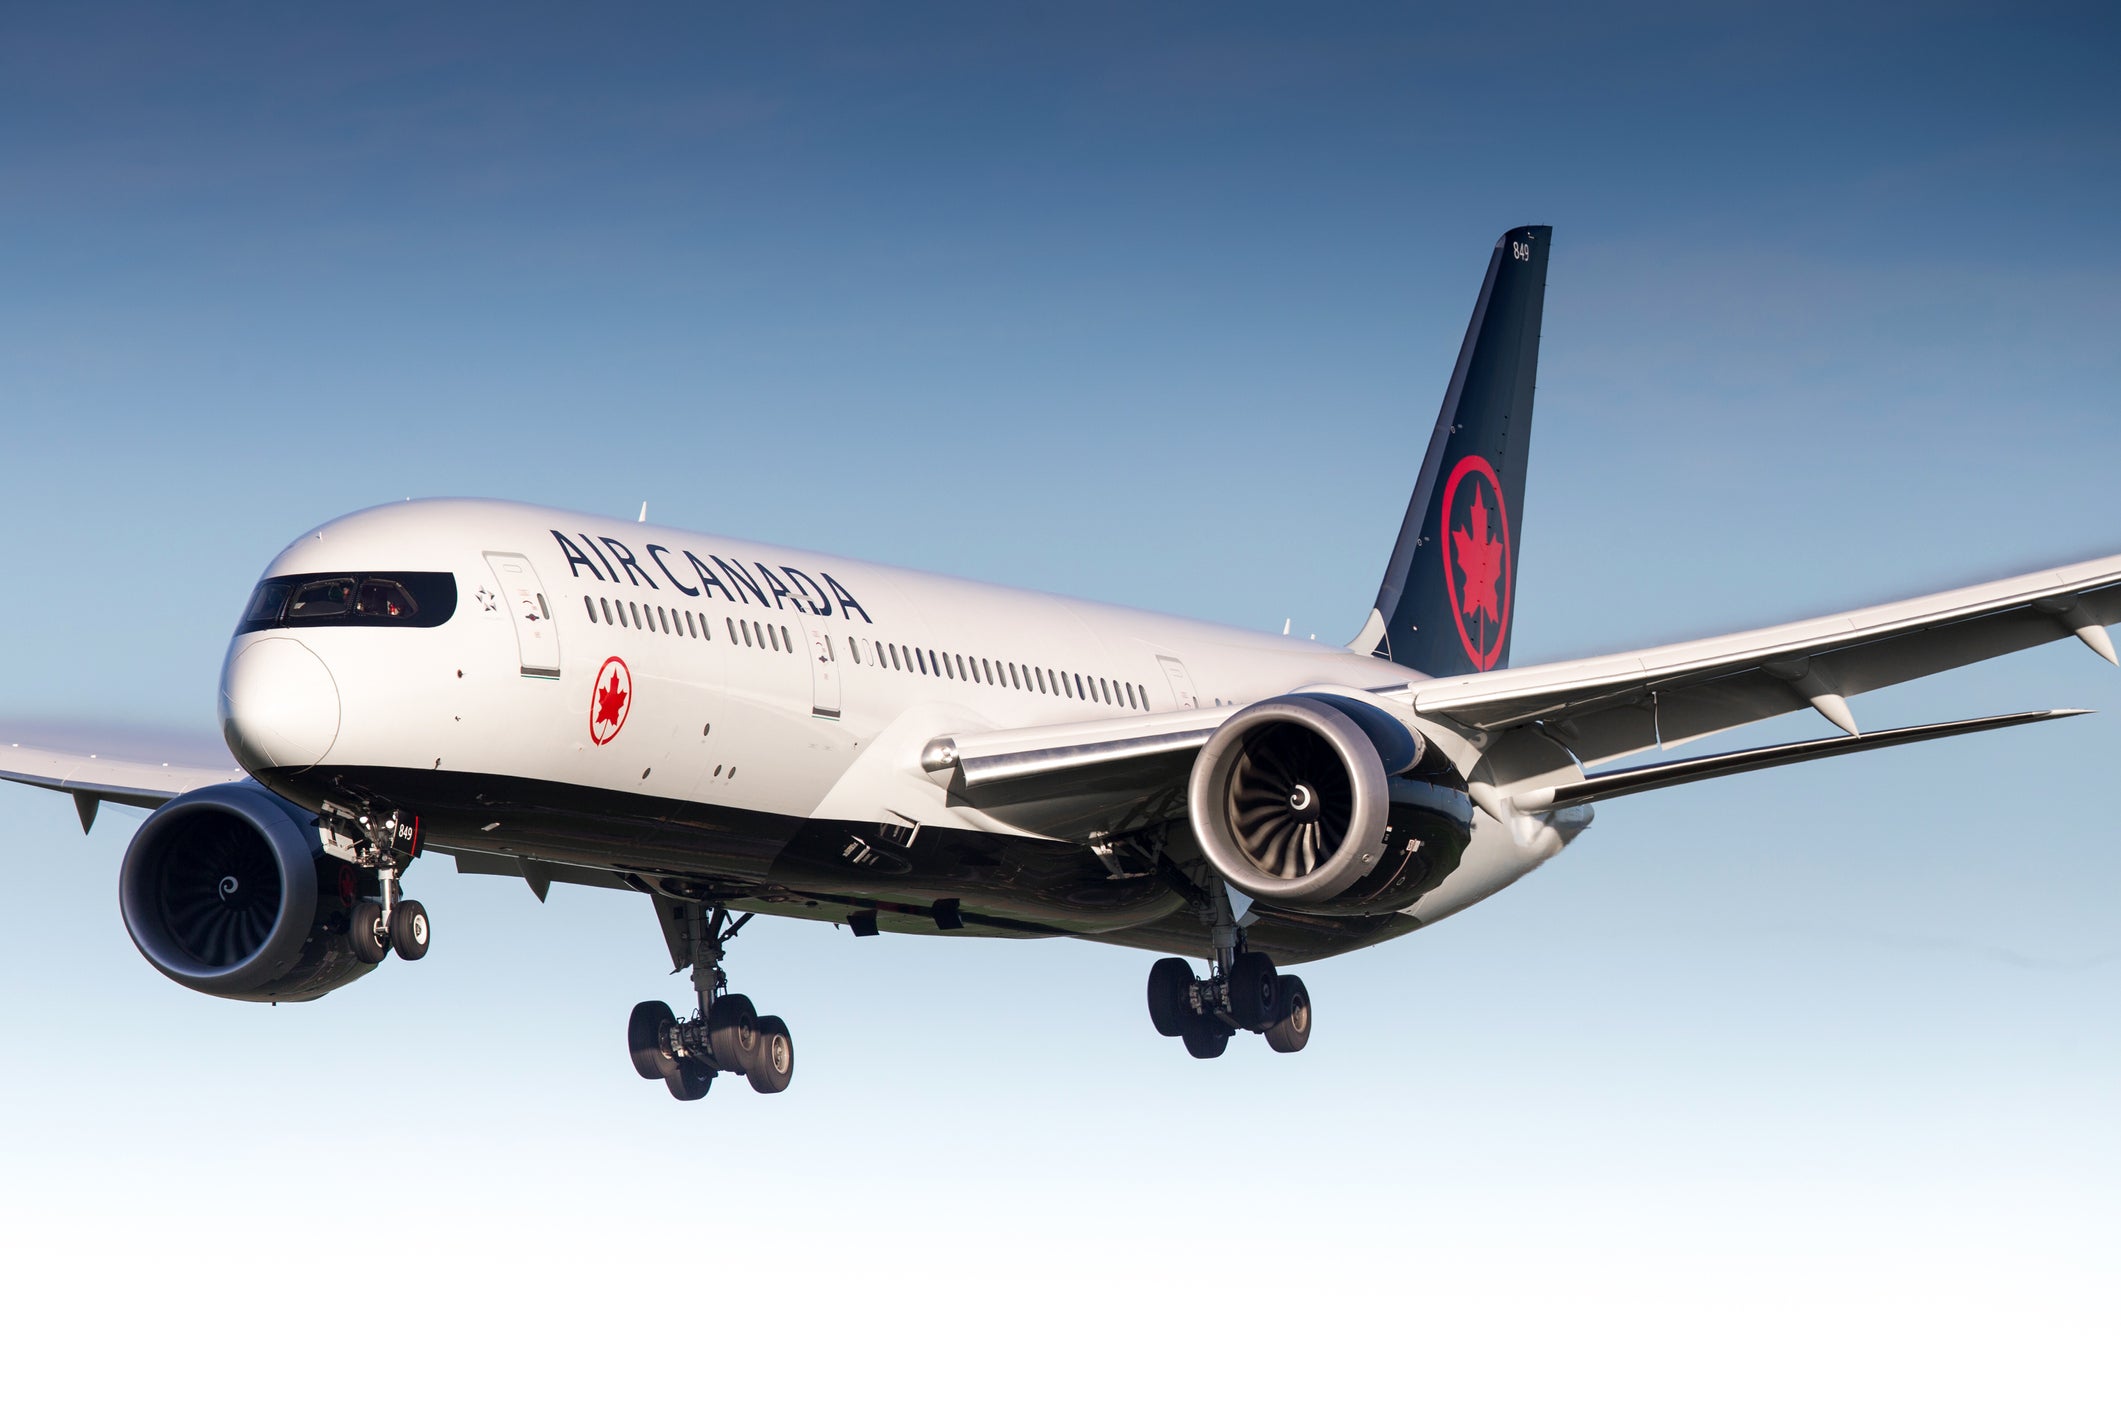 Air Canada has apologised for the incident